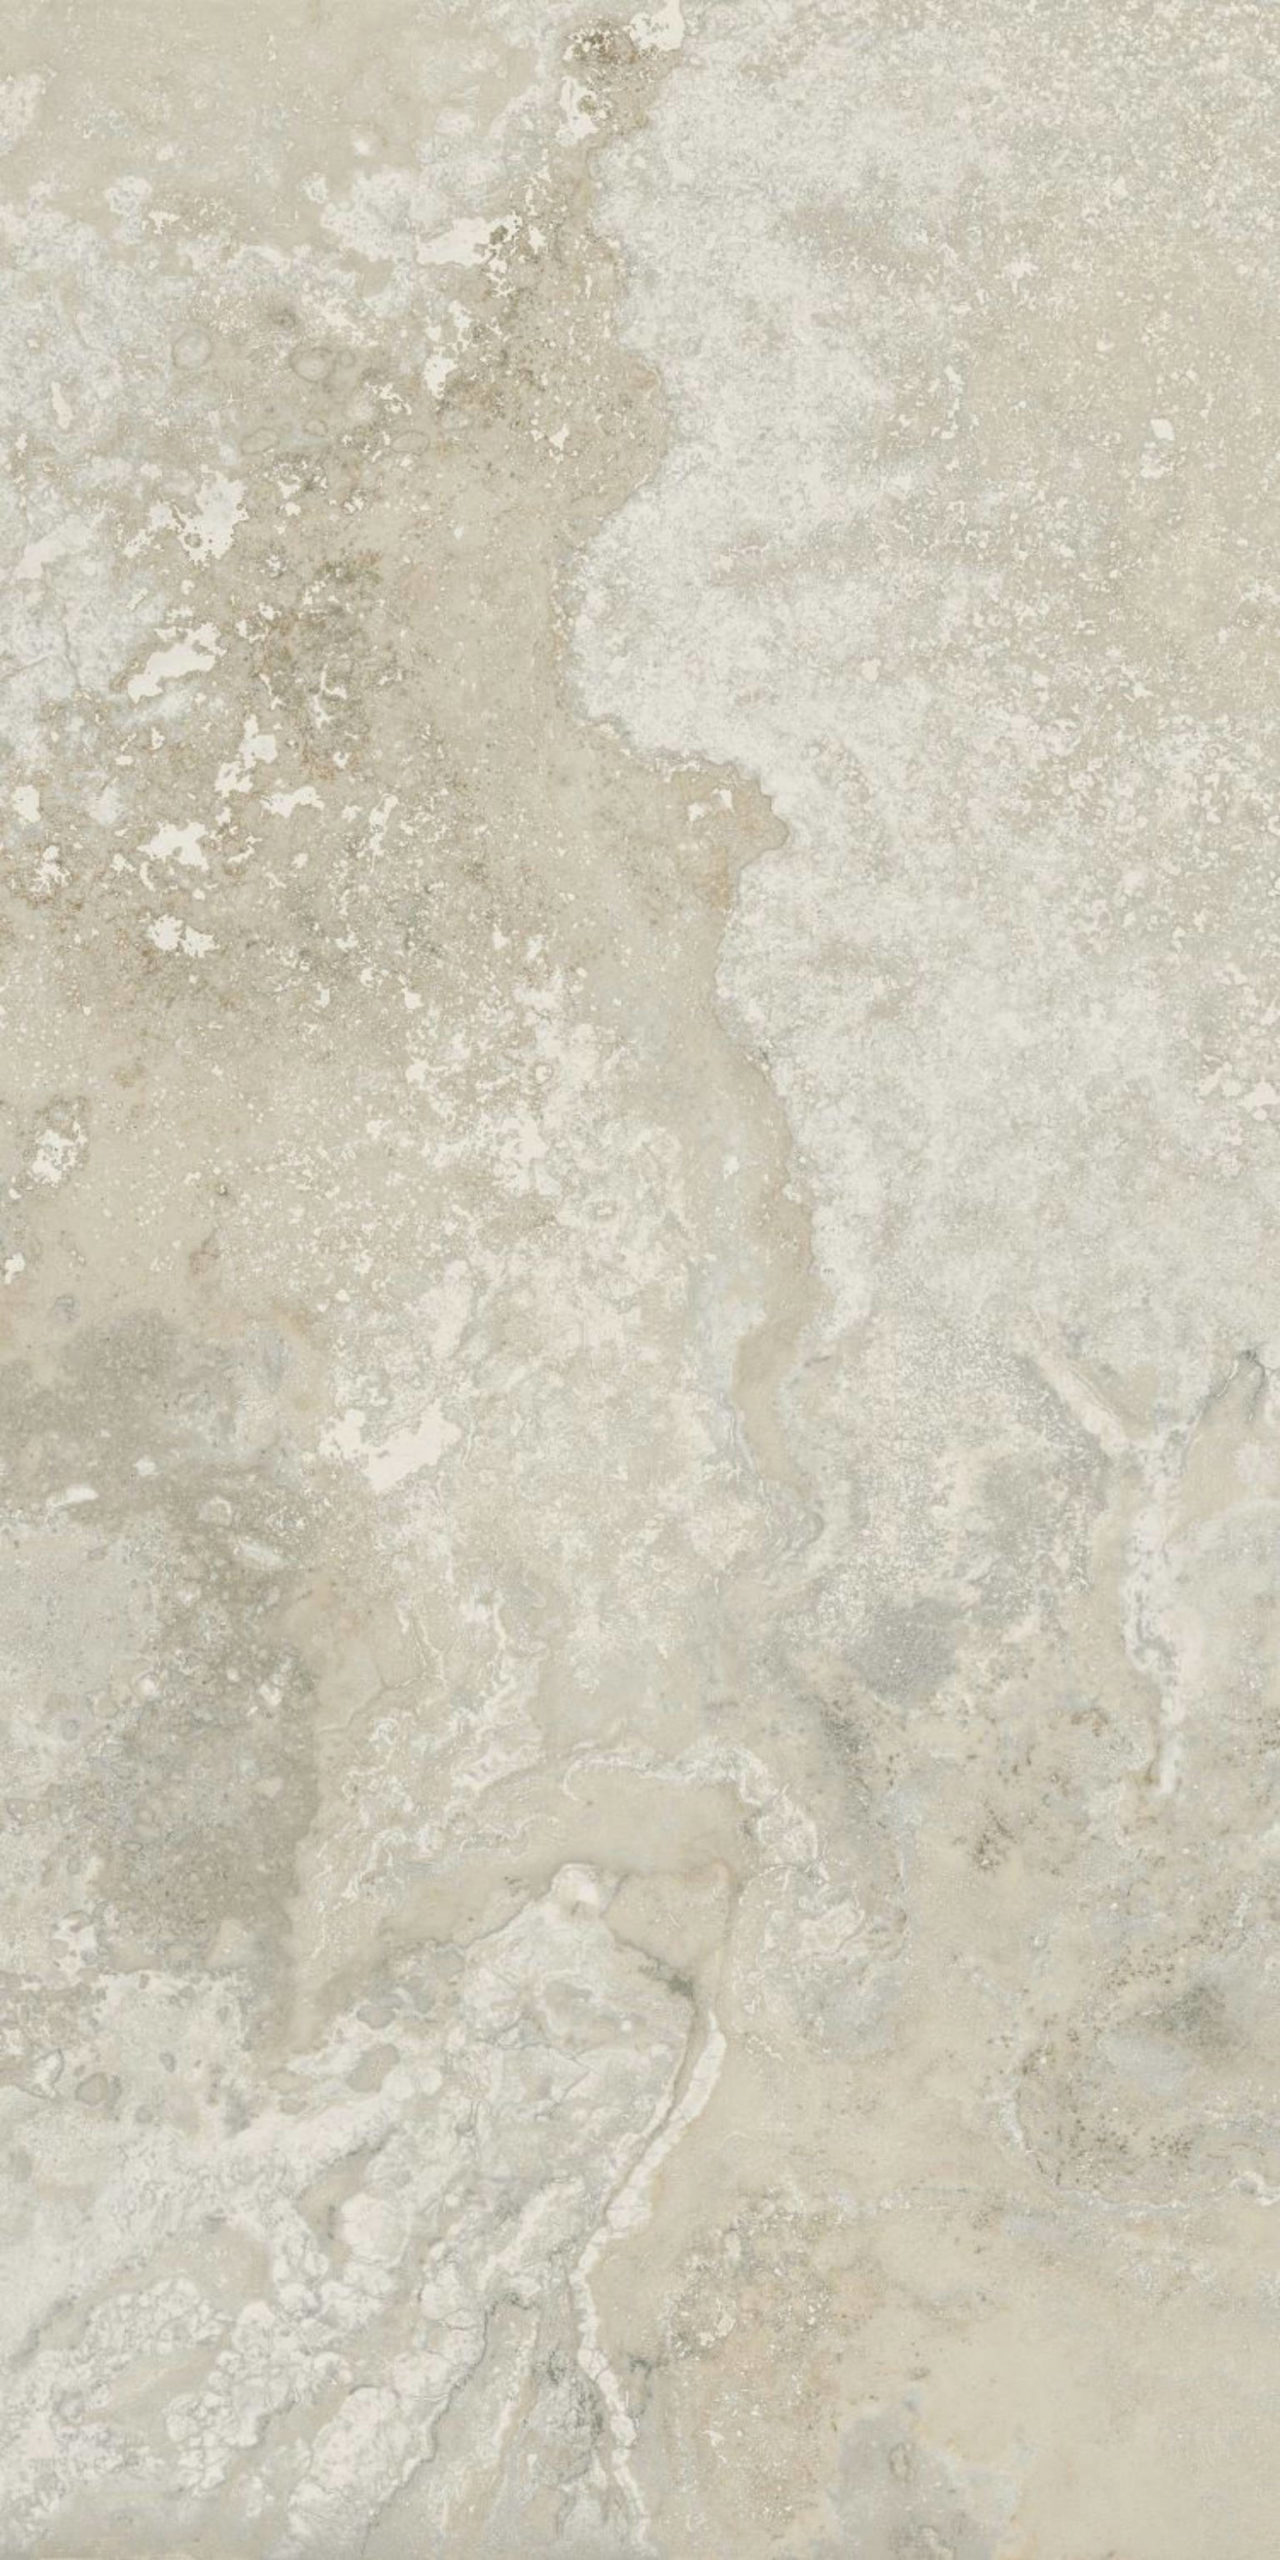 Prestige Travertino White | Stones And More | Finest selection of Mosaics, Glass, Tile and Stone